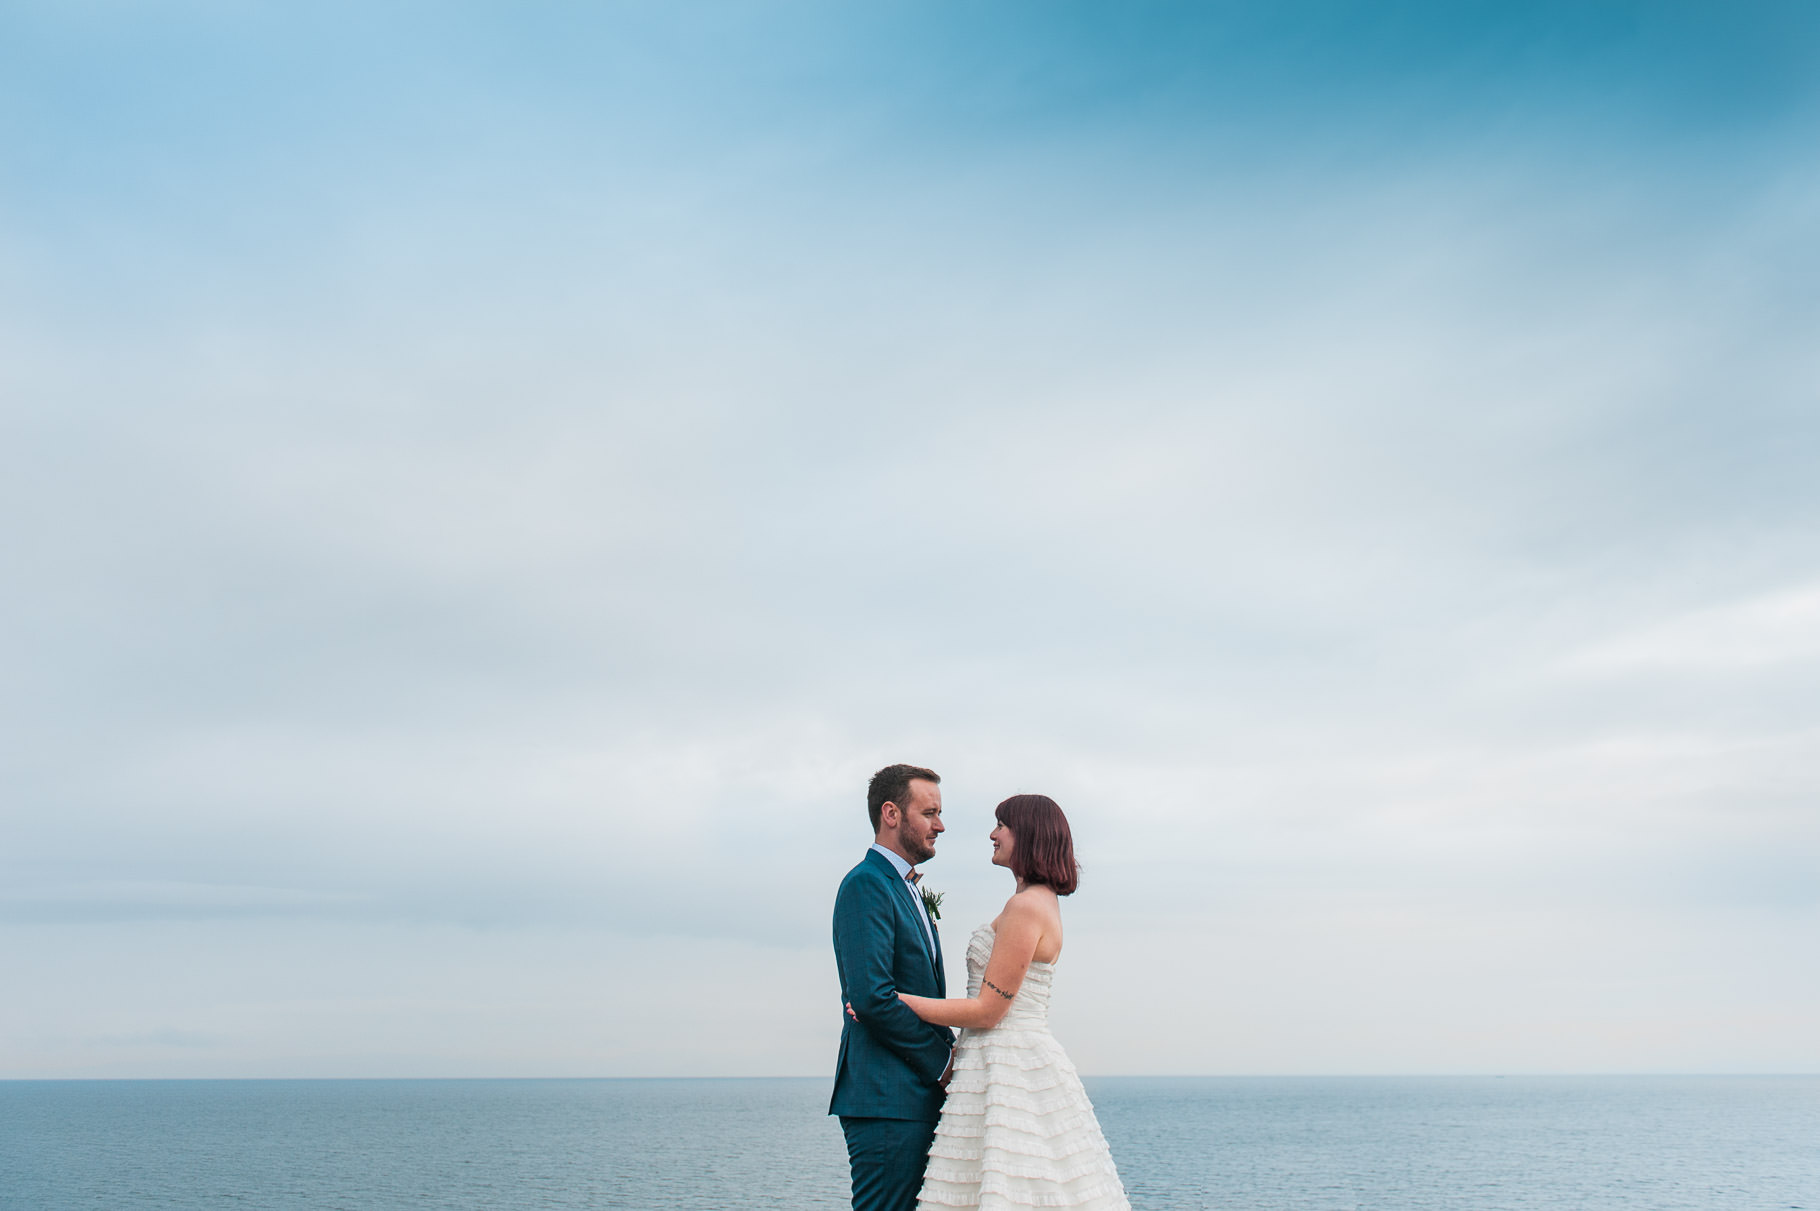 elopement by the sea-bride and groom portrait-bride and groom by the ocean